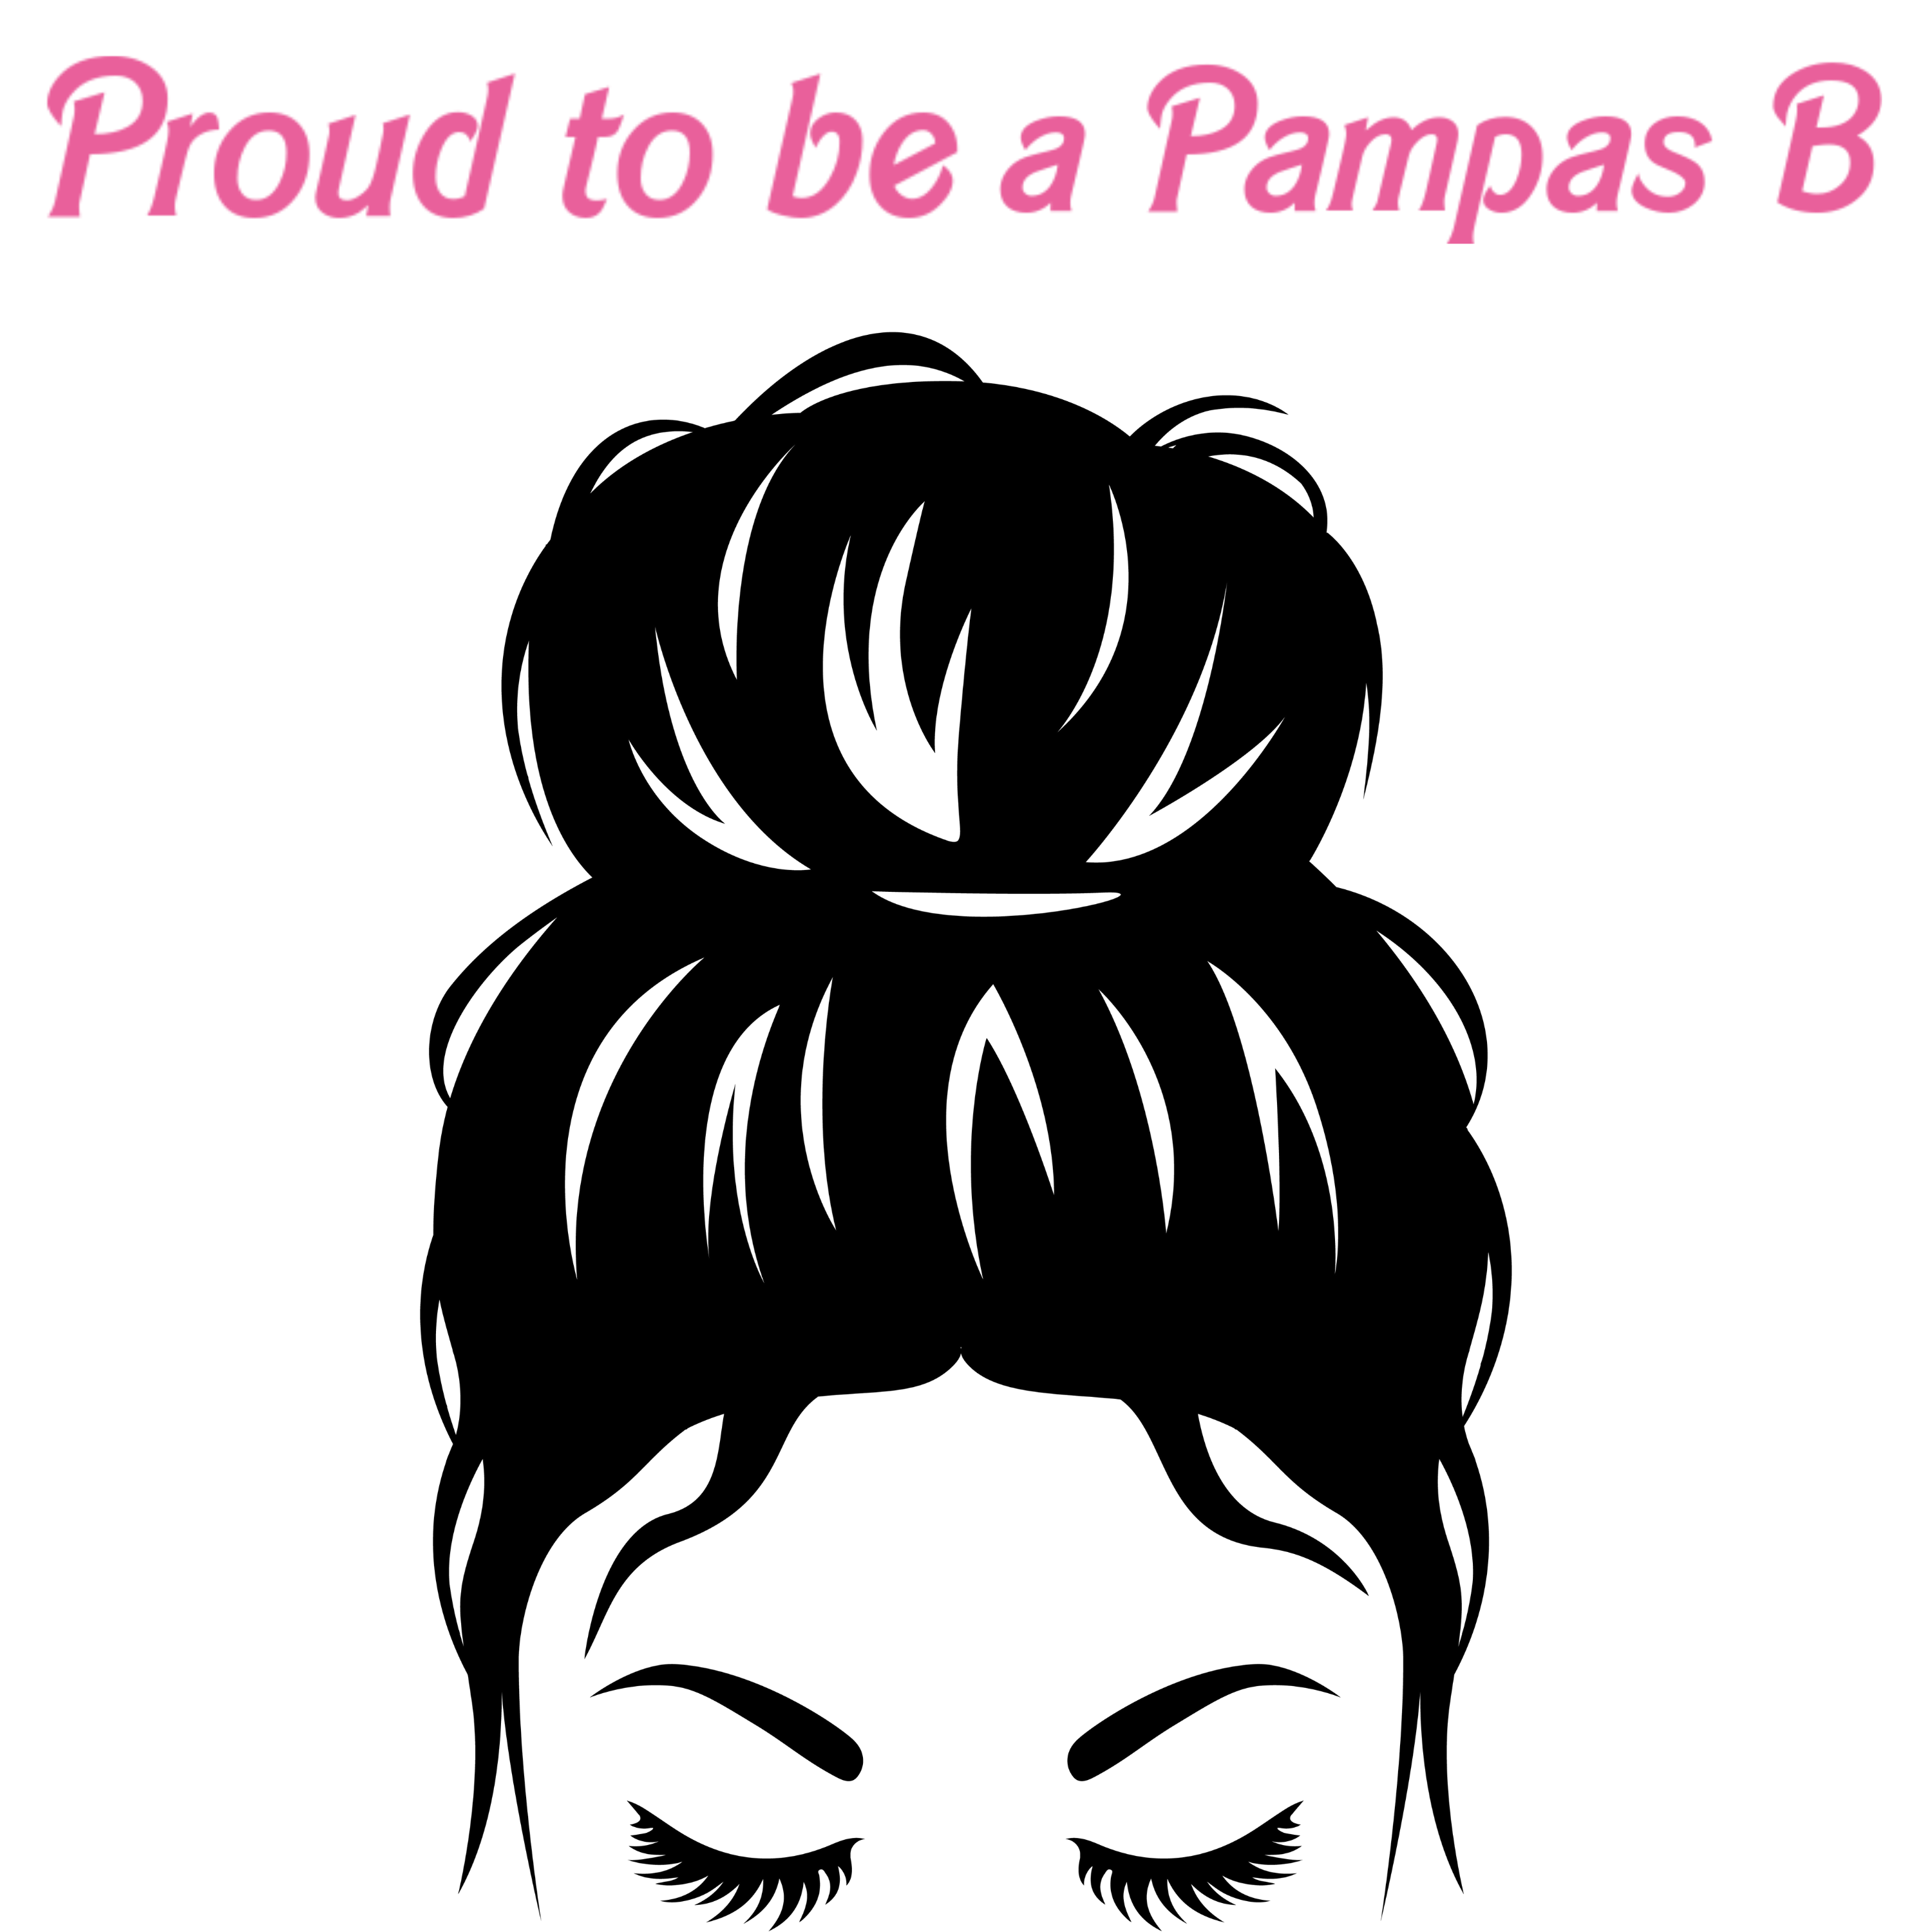 The Pampas B Podcast